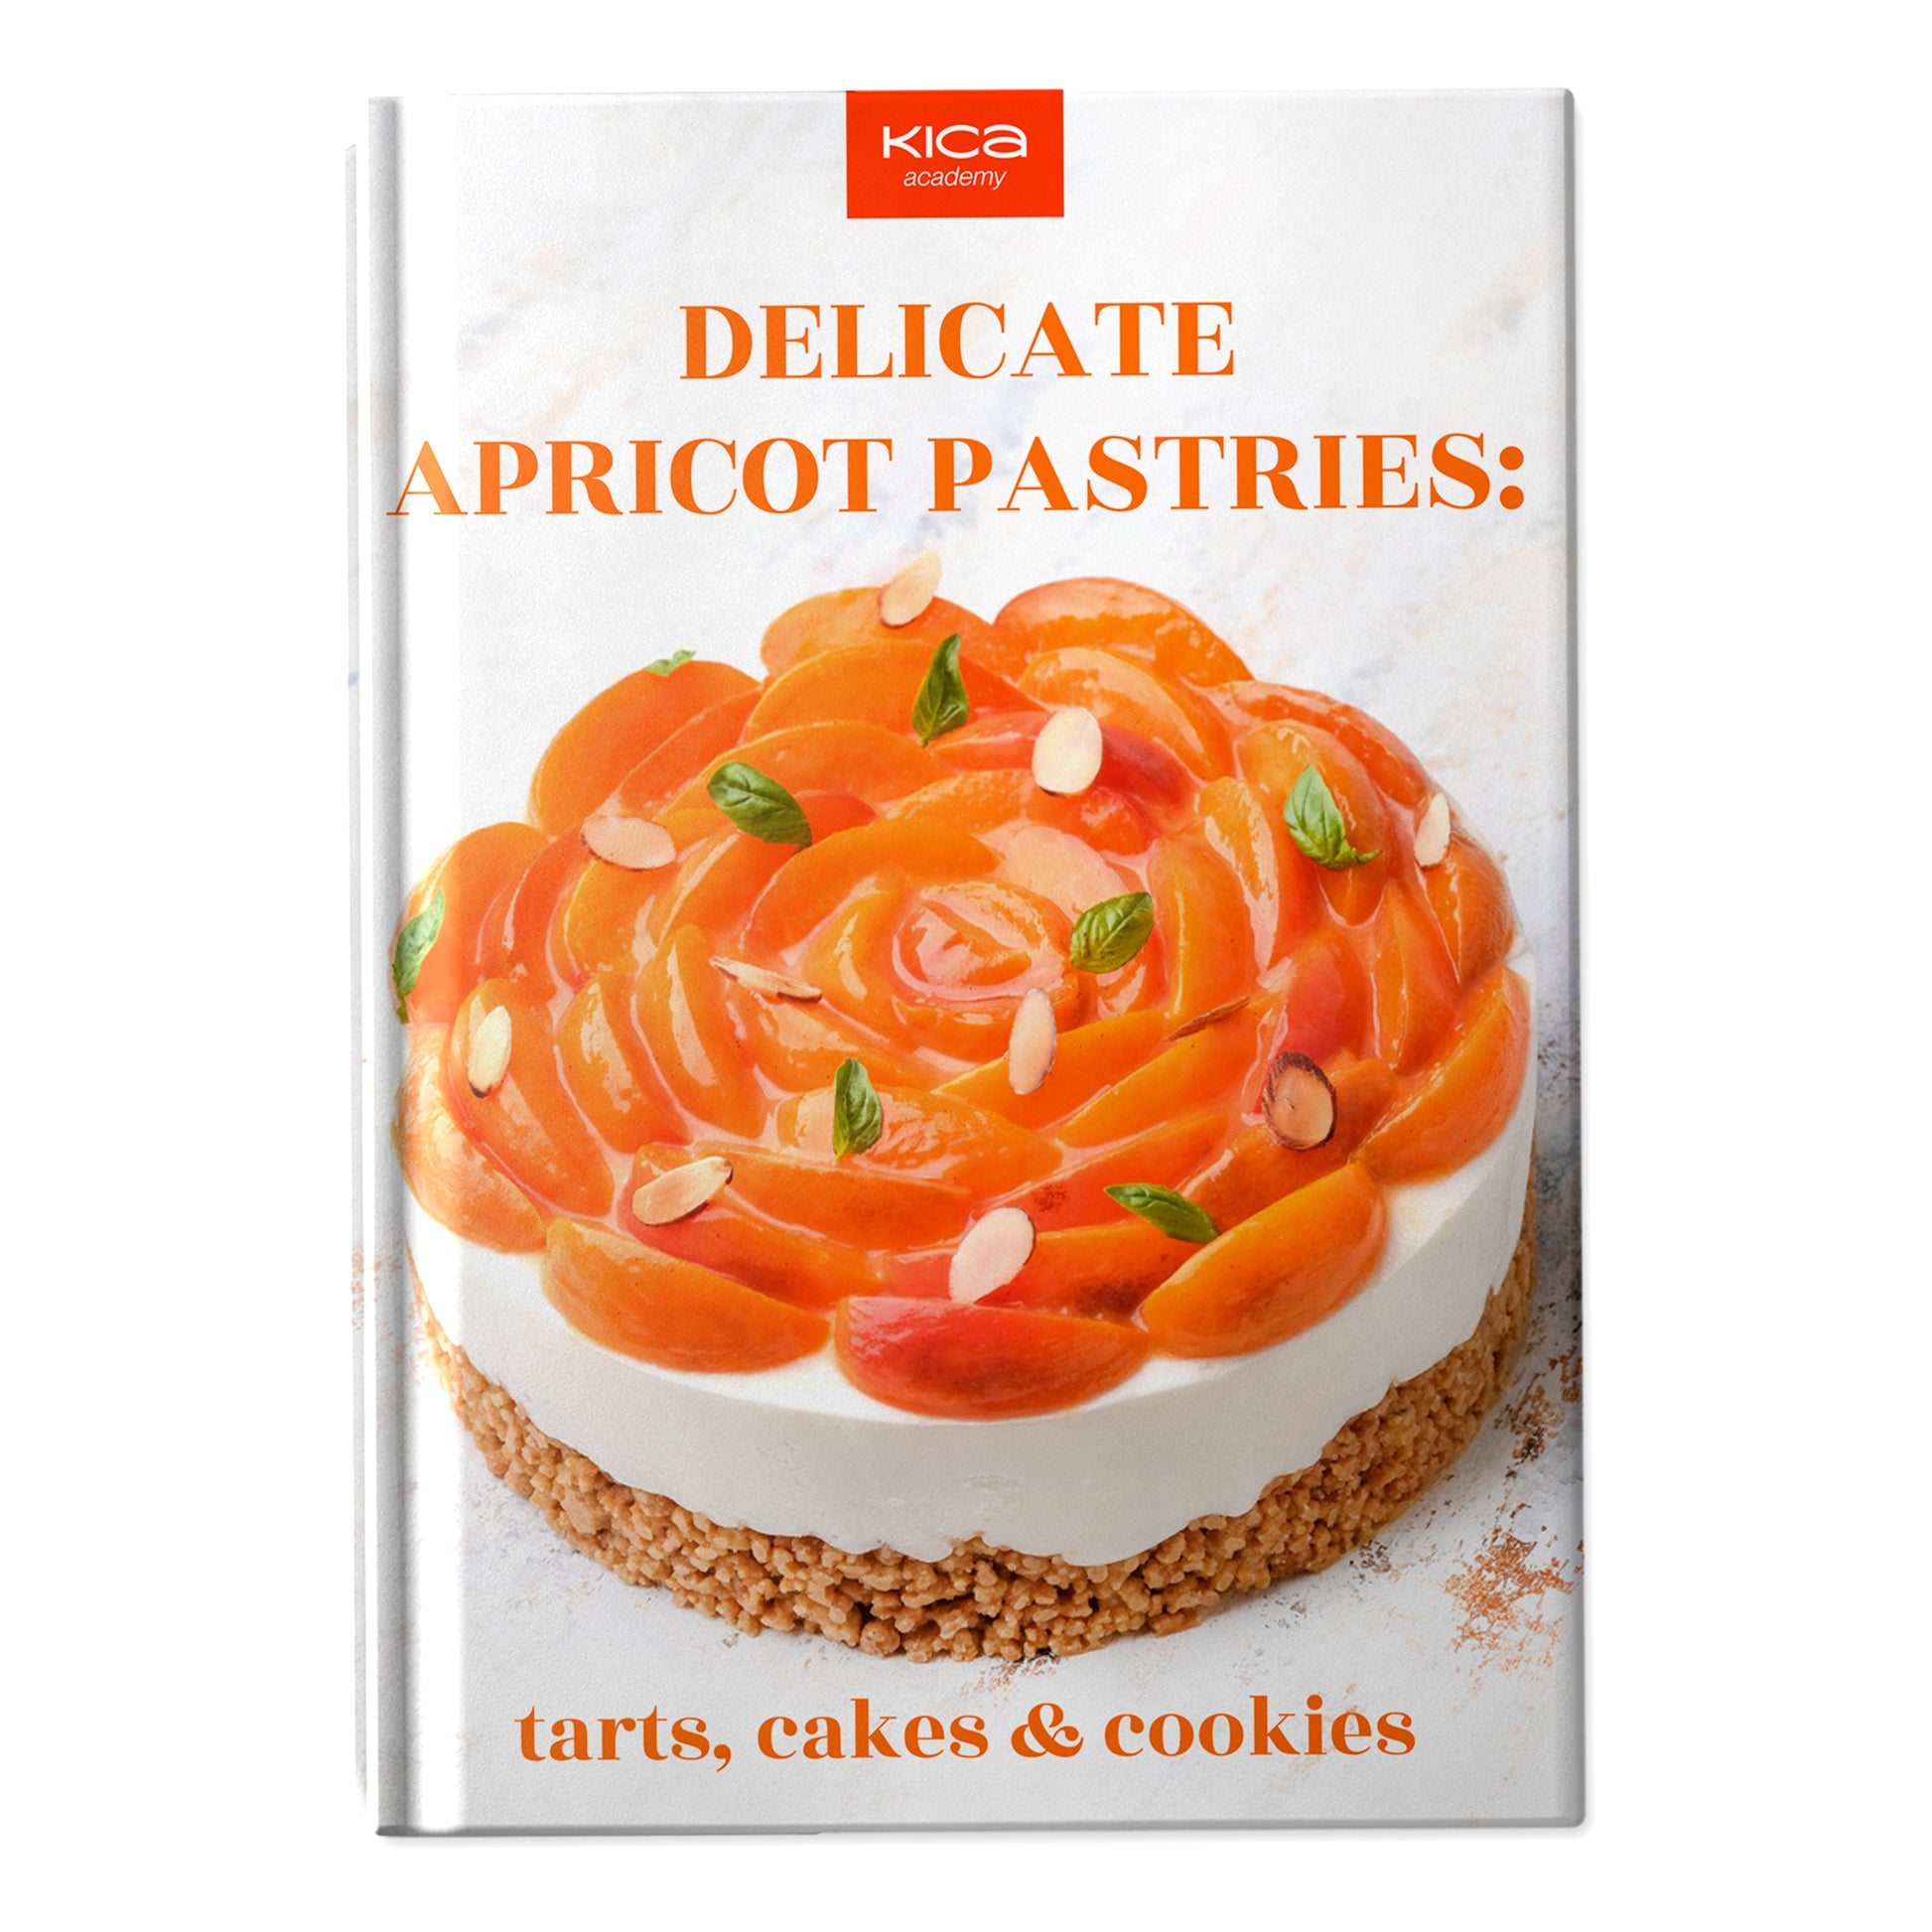 Delicate Apricot Pastries: Tarts, Cake & Cookies